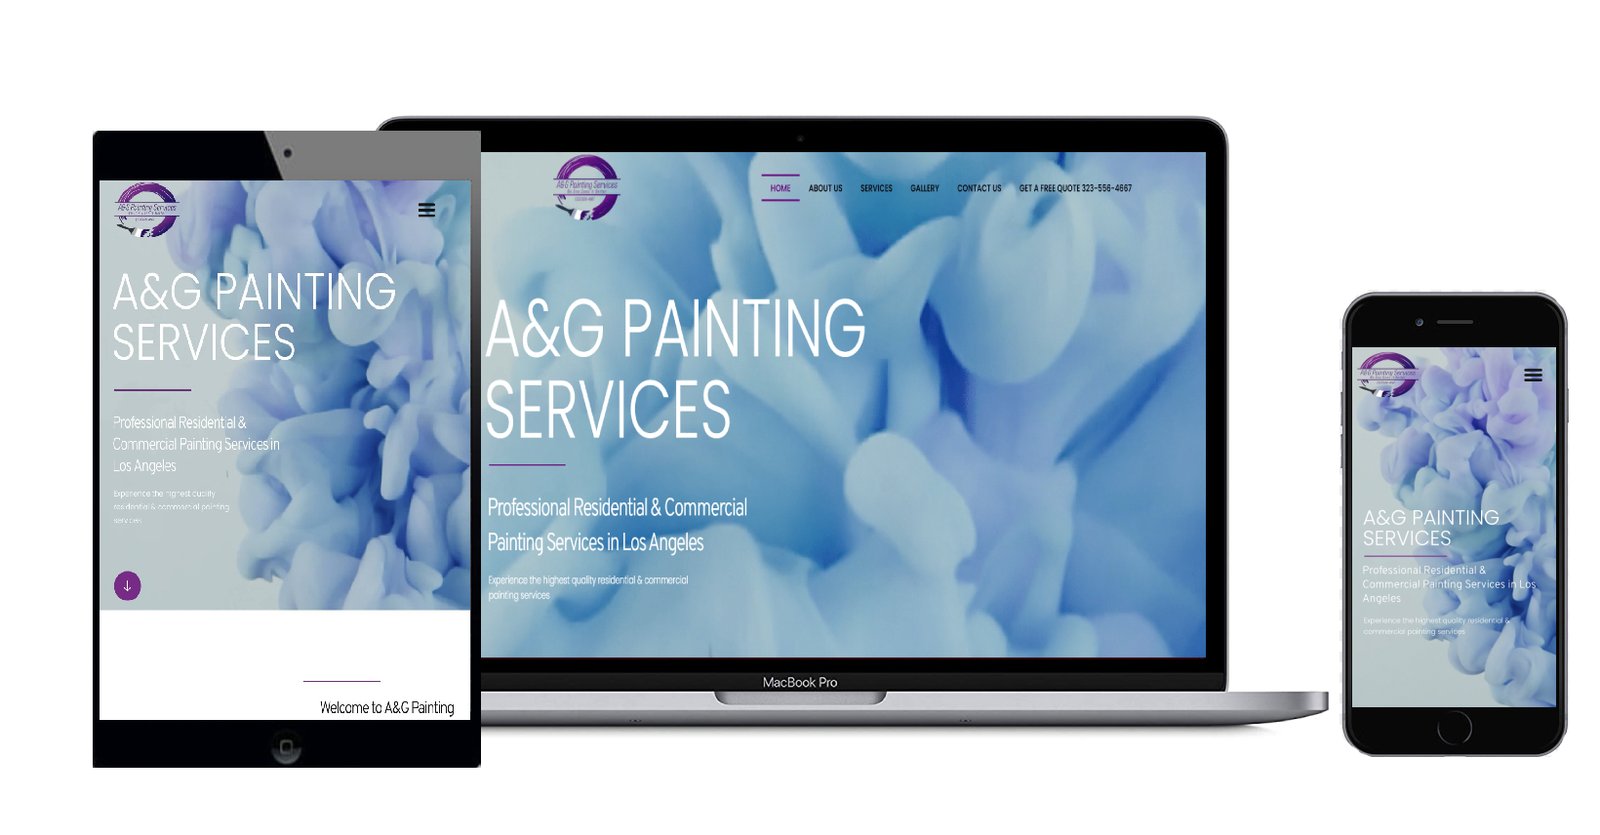 A&G-Painting-Services-Los-Angeles-designed-by-Wing-my-Web